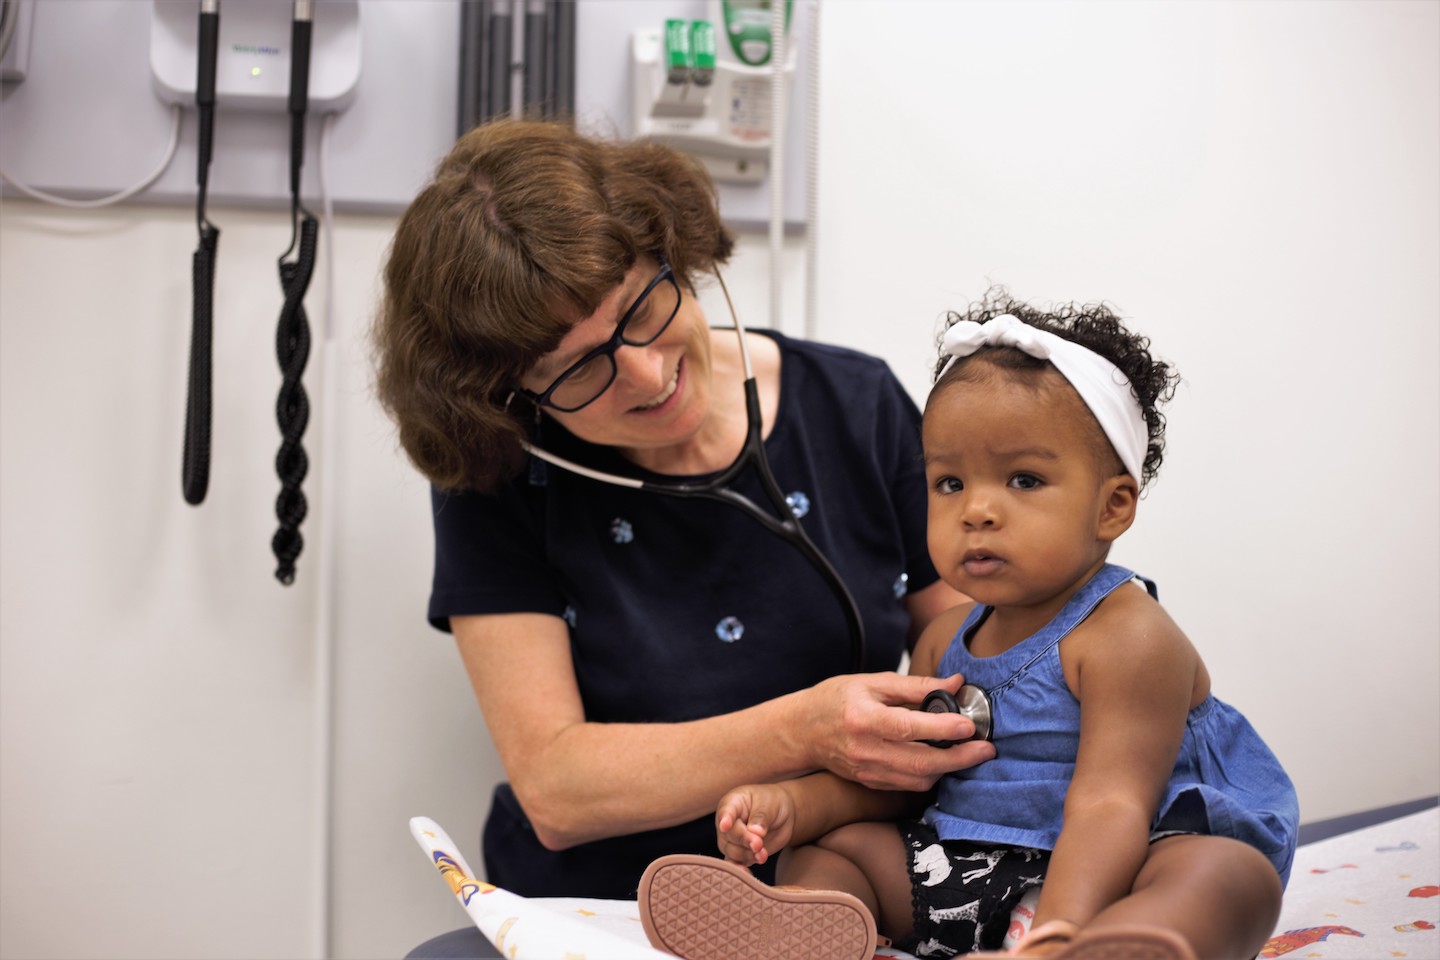 A smiling doctor uses a stethoscope with a toddler.